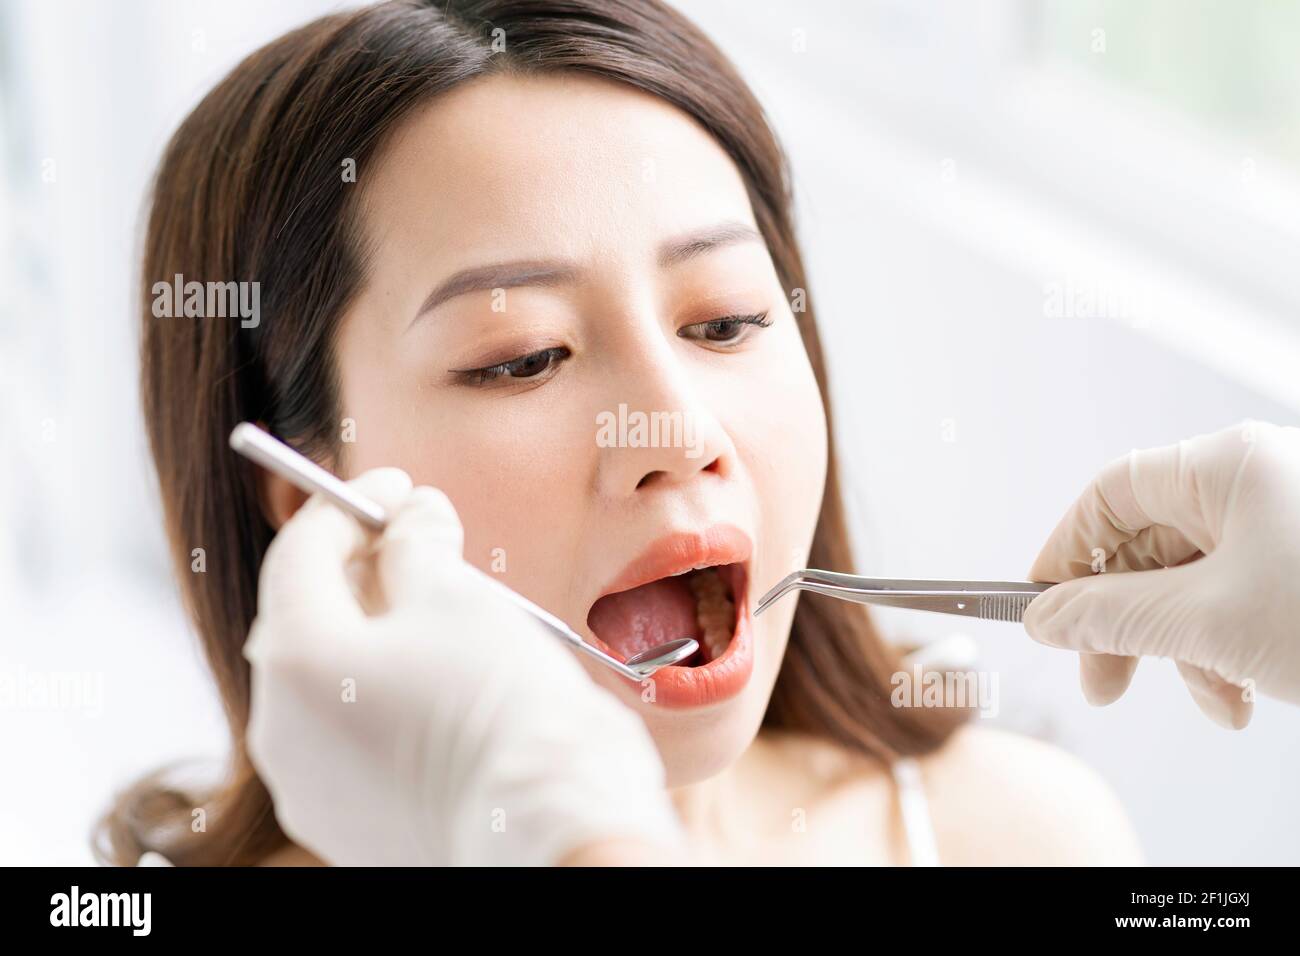 The Asian woman is having a routine dental exam at the dental clinic Stock Photo